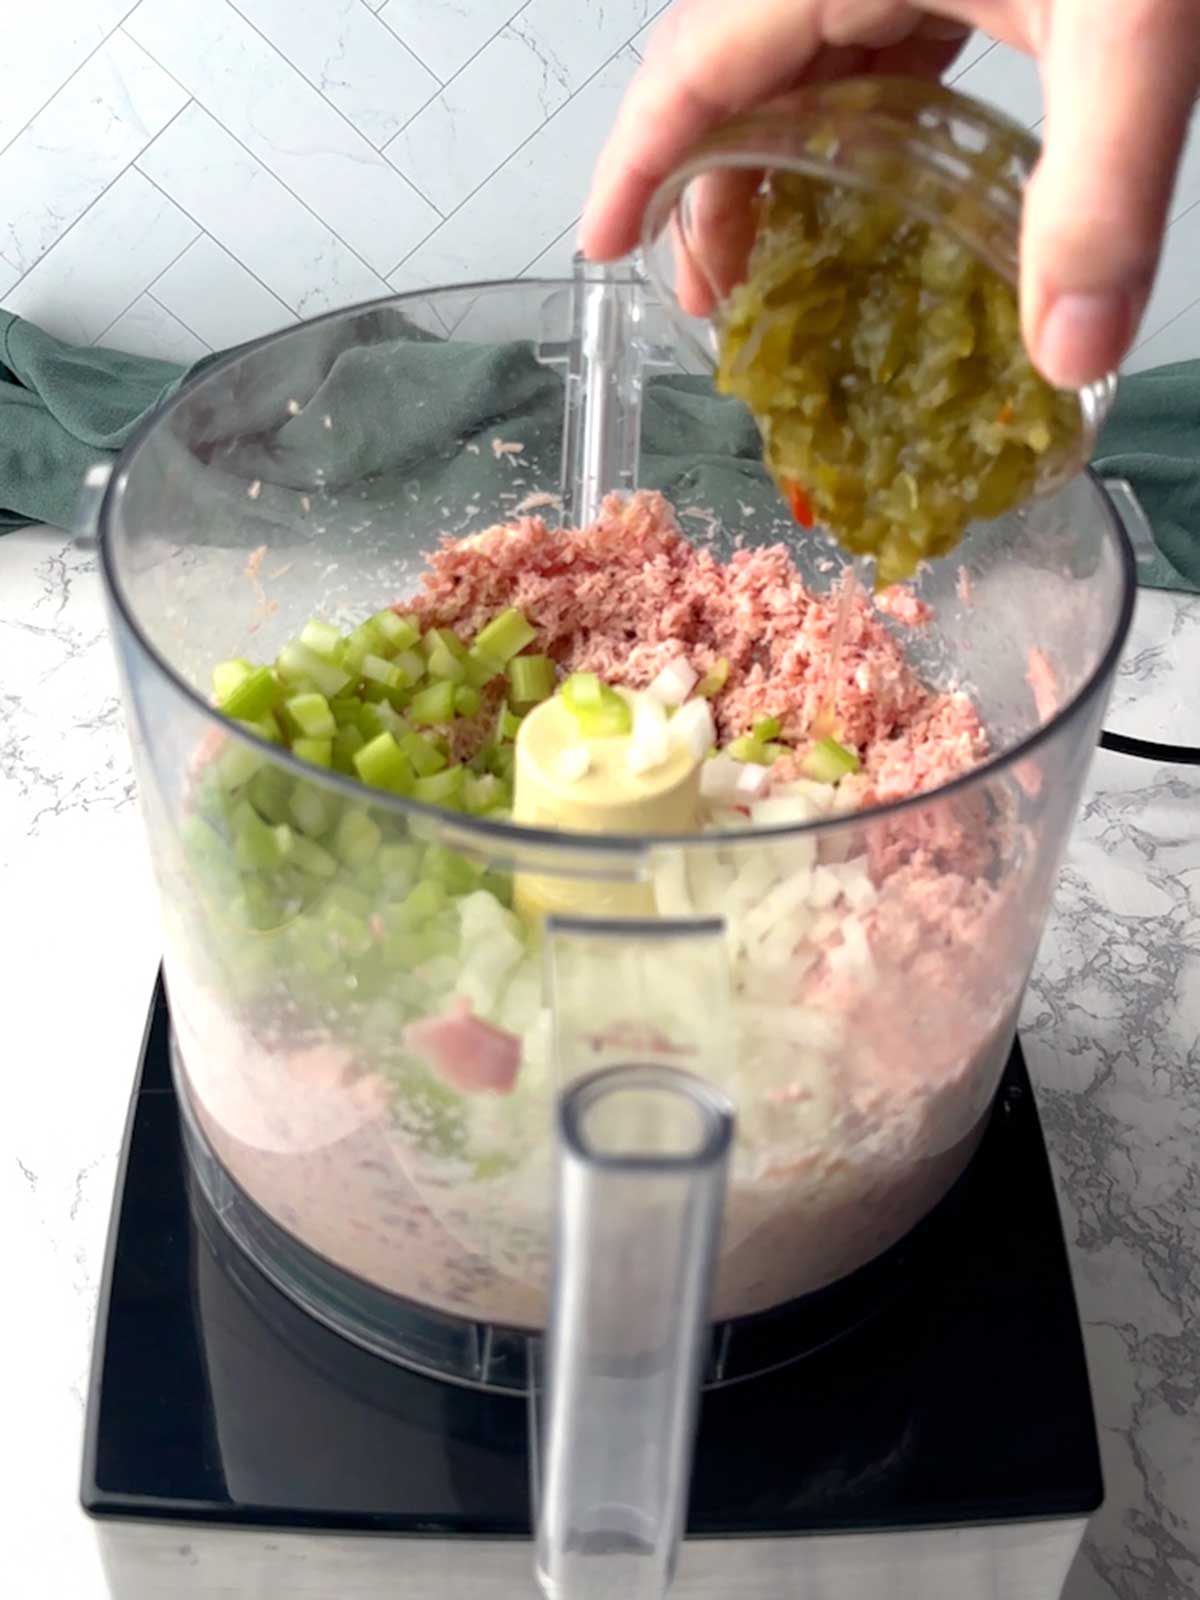 Adding sweet pickle relish to the food processor.